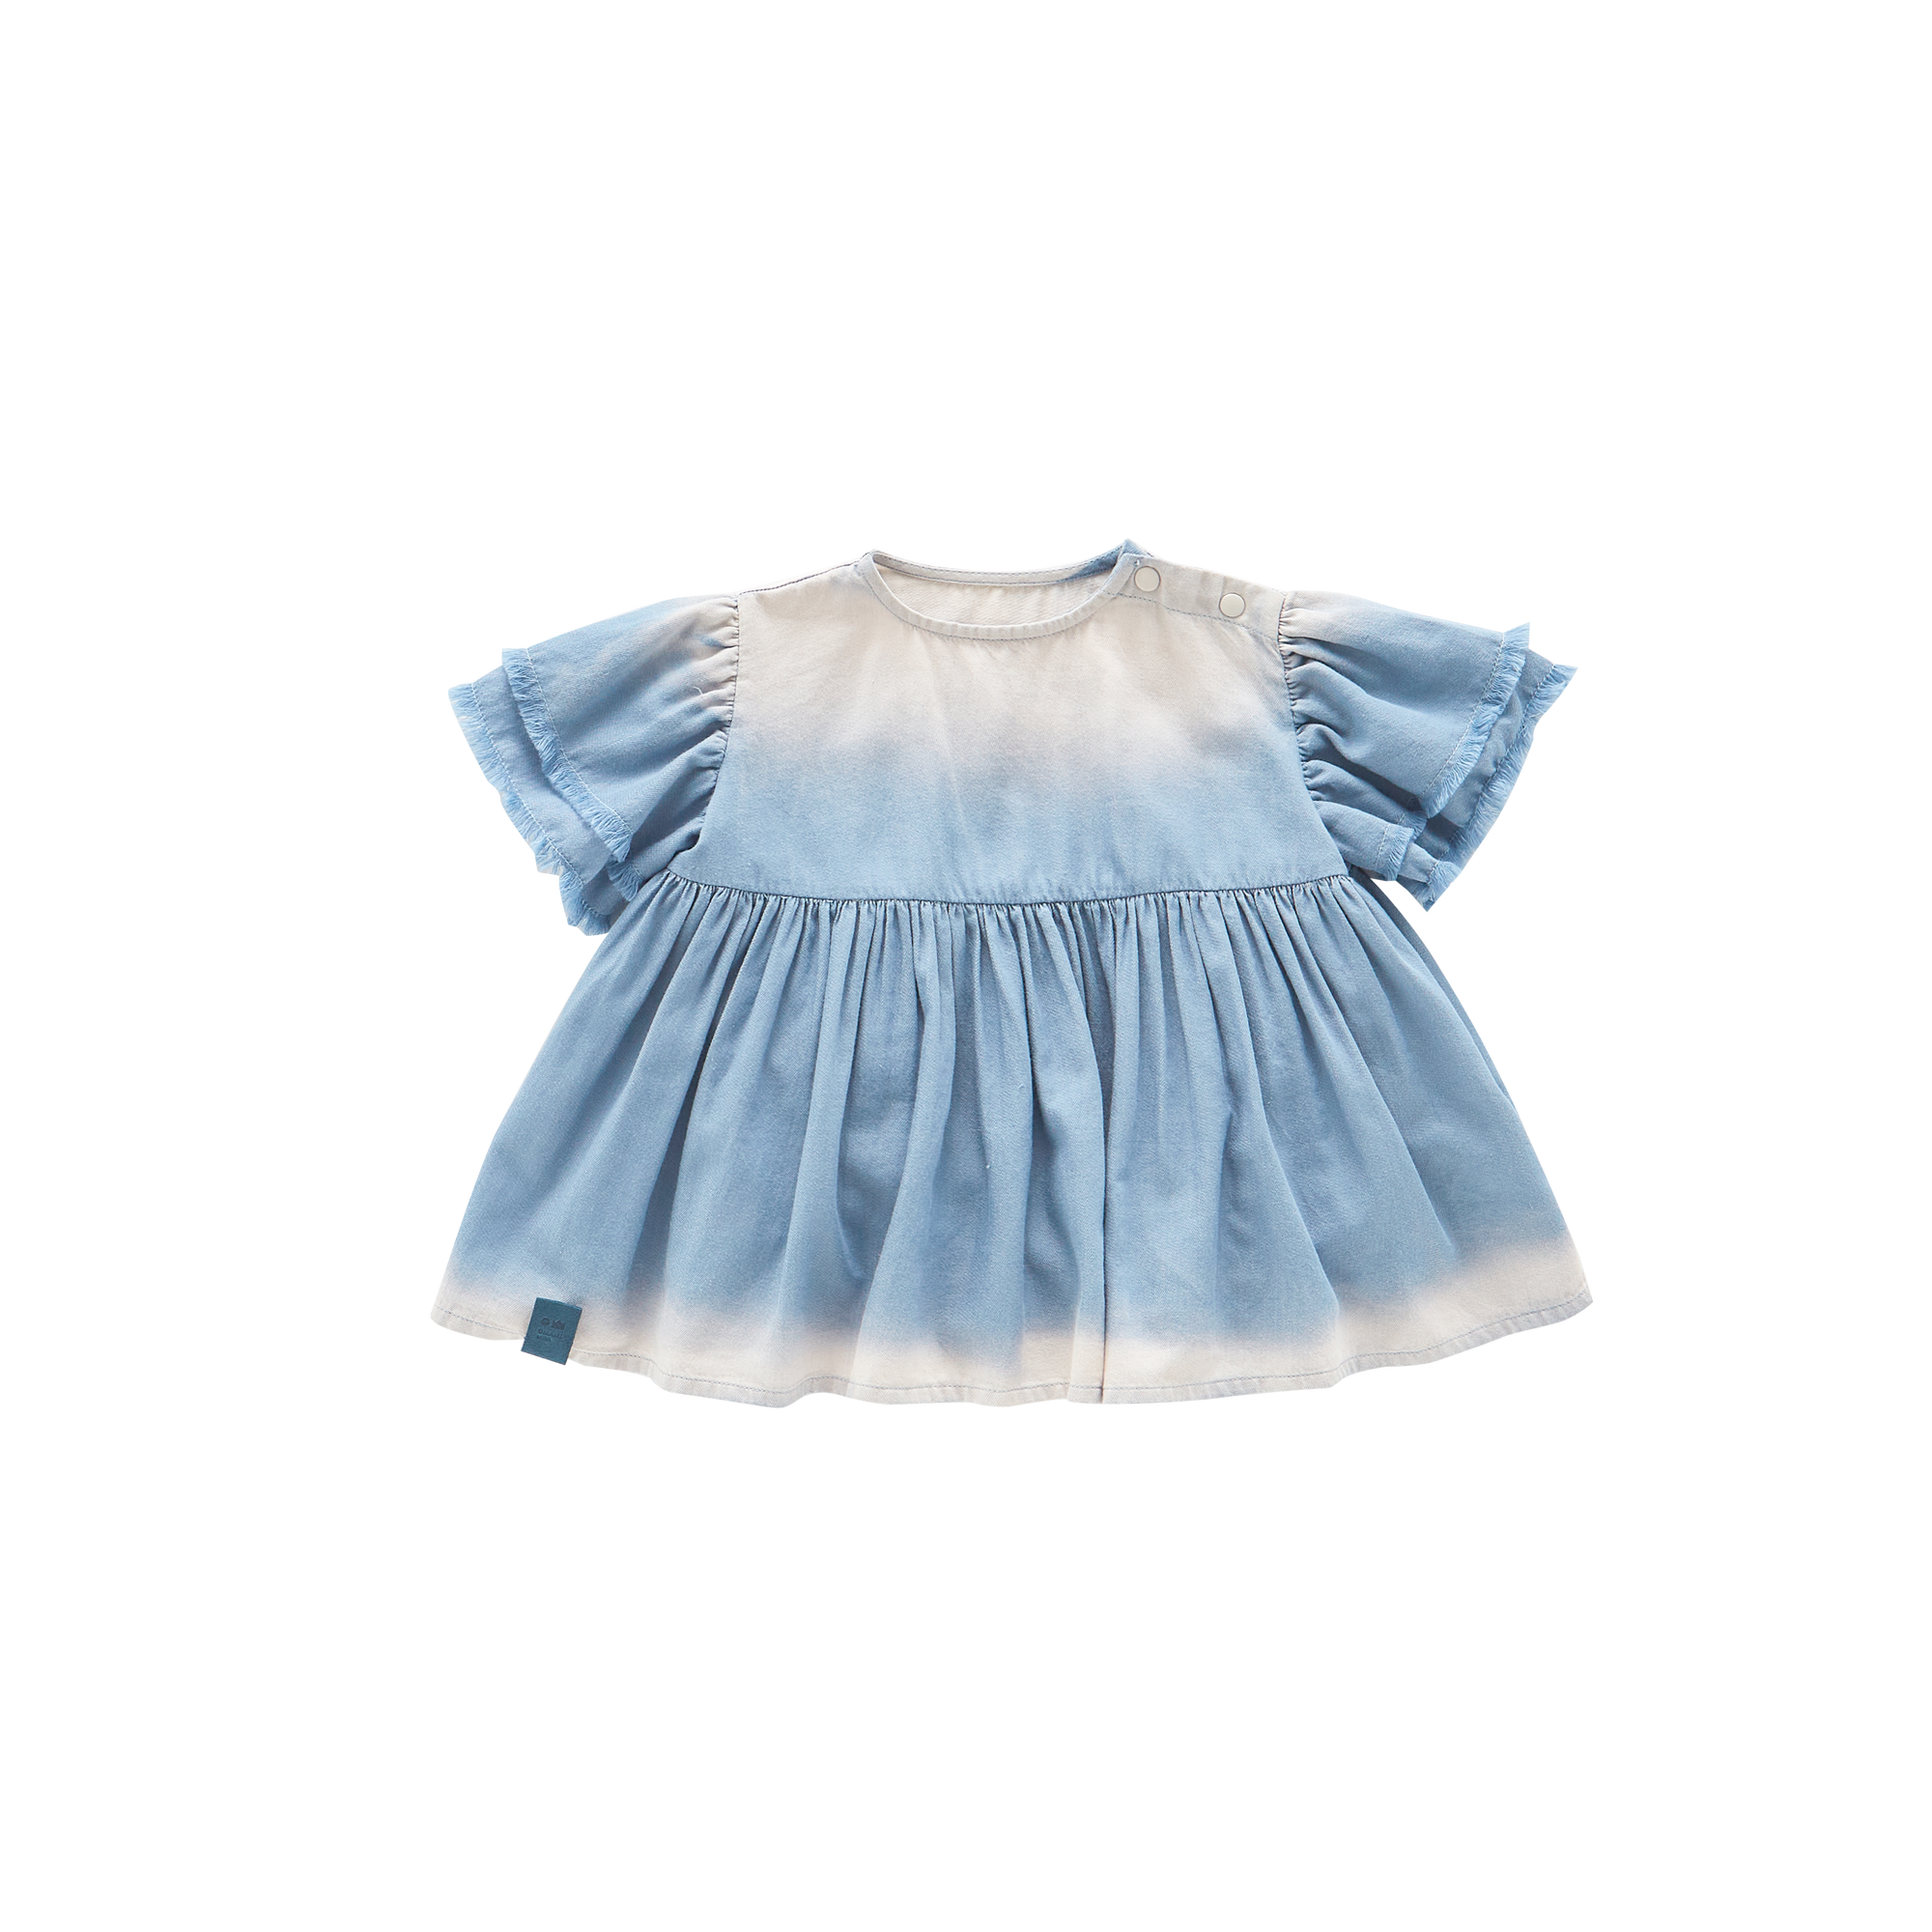 Baby Fit and Flare Dress  - Blue Chambrey